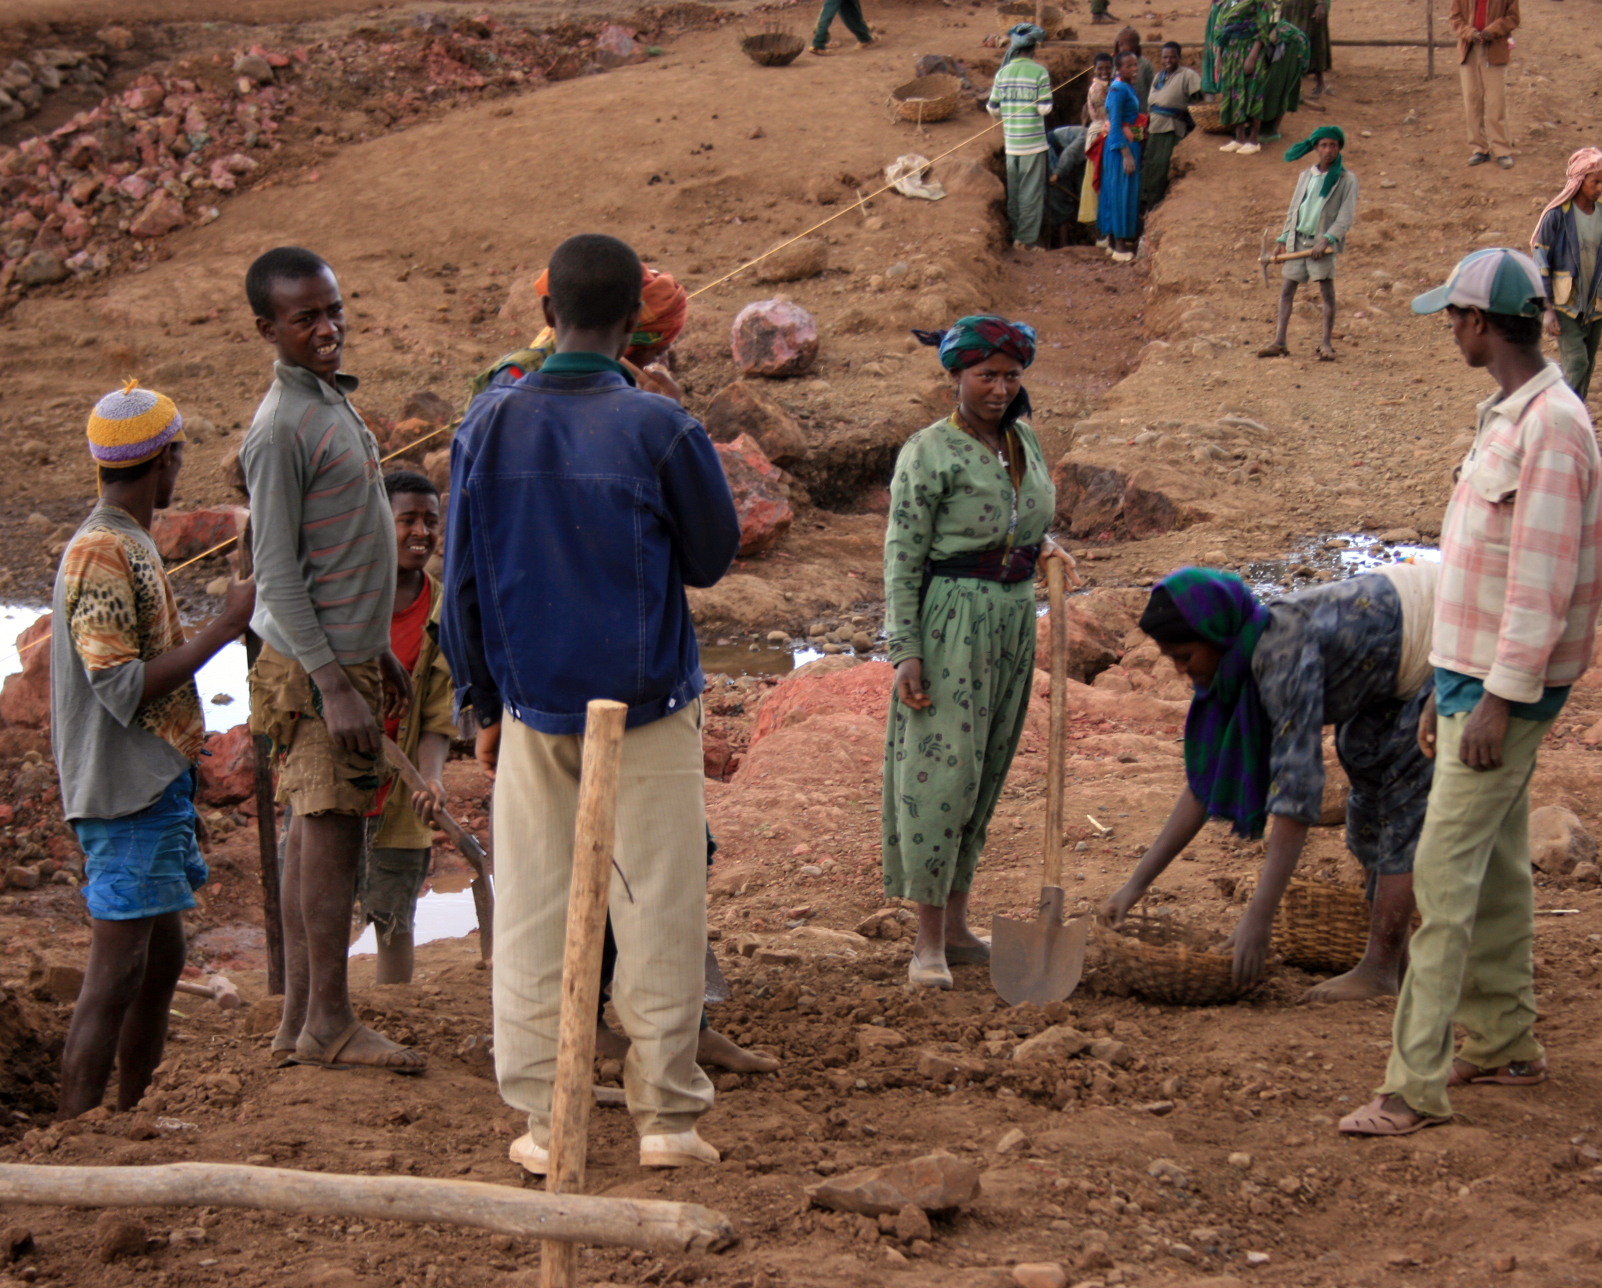 A group of Ethiopians work build a stream crossing.